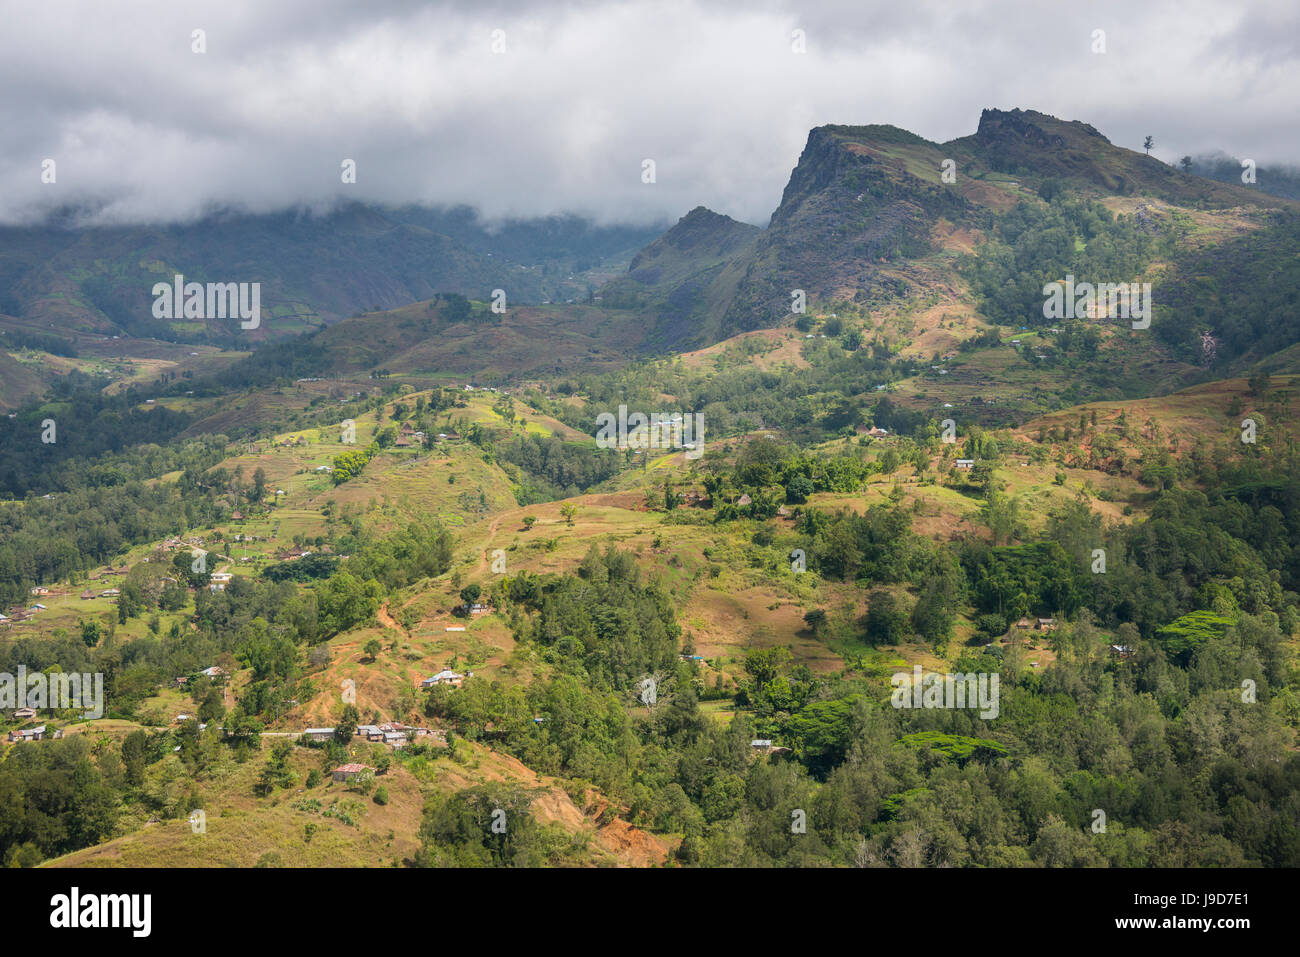 View over the mountains of Maubisse from the Pousada de Maubisse, mountain town of Maubisse, East Timor, Southeast Asia, Asia Stock Photo